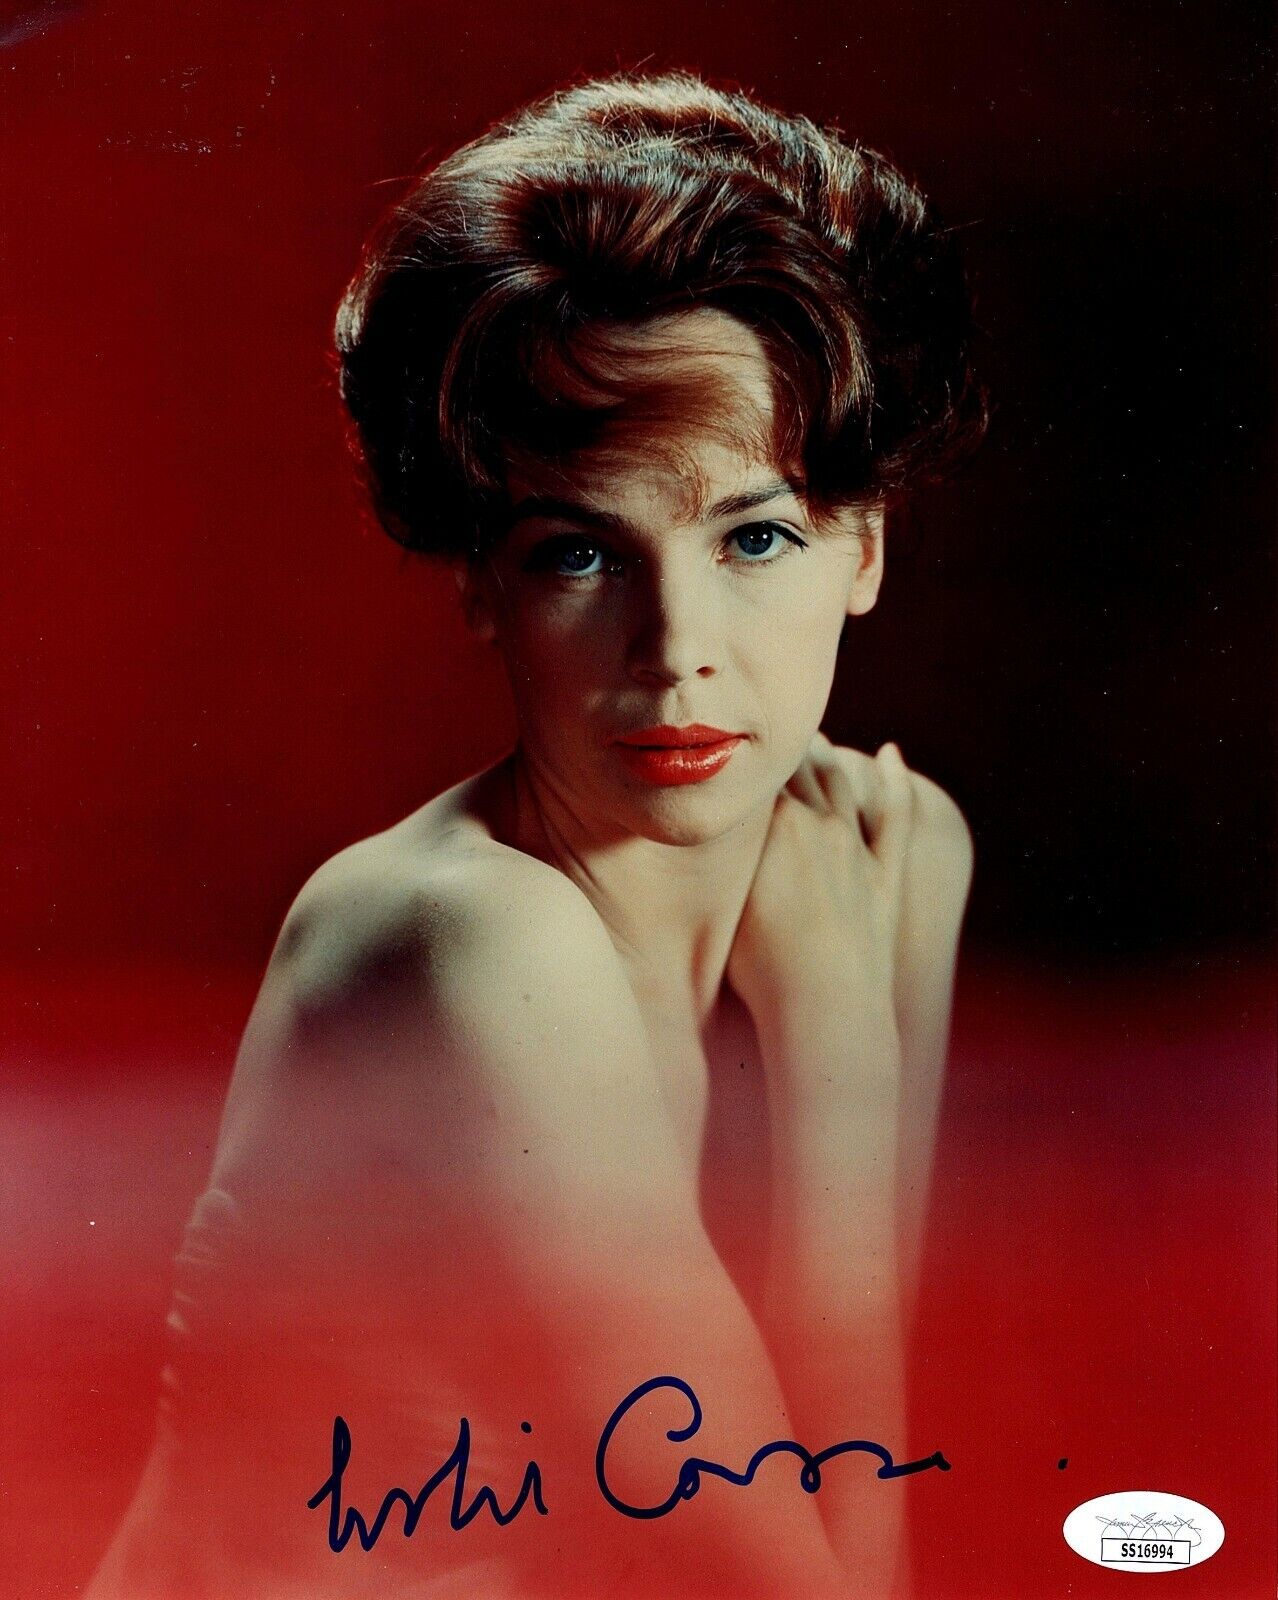 LESLIE CARON Autograph Hand SIGNED 8x10 Photo Poster painting BEAUTIFUL JSA CERTIFIED AUTHENTIC